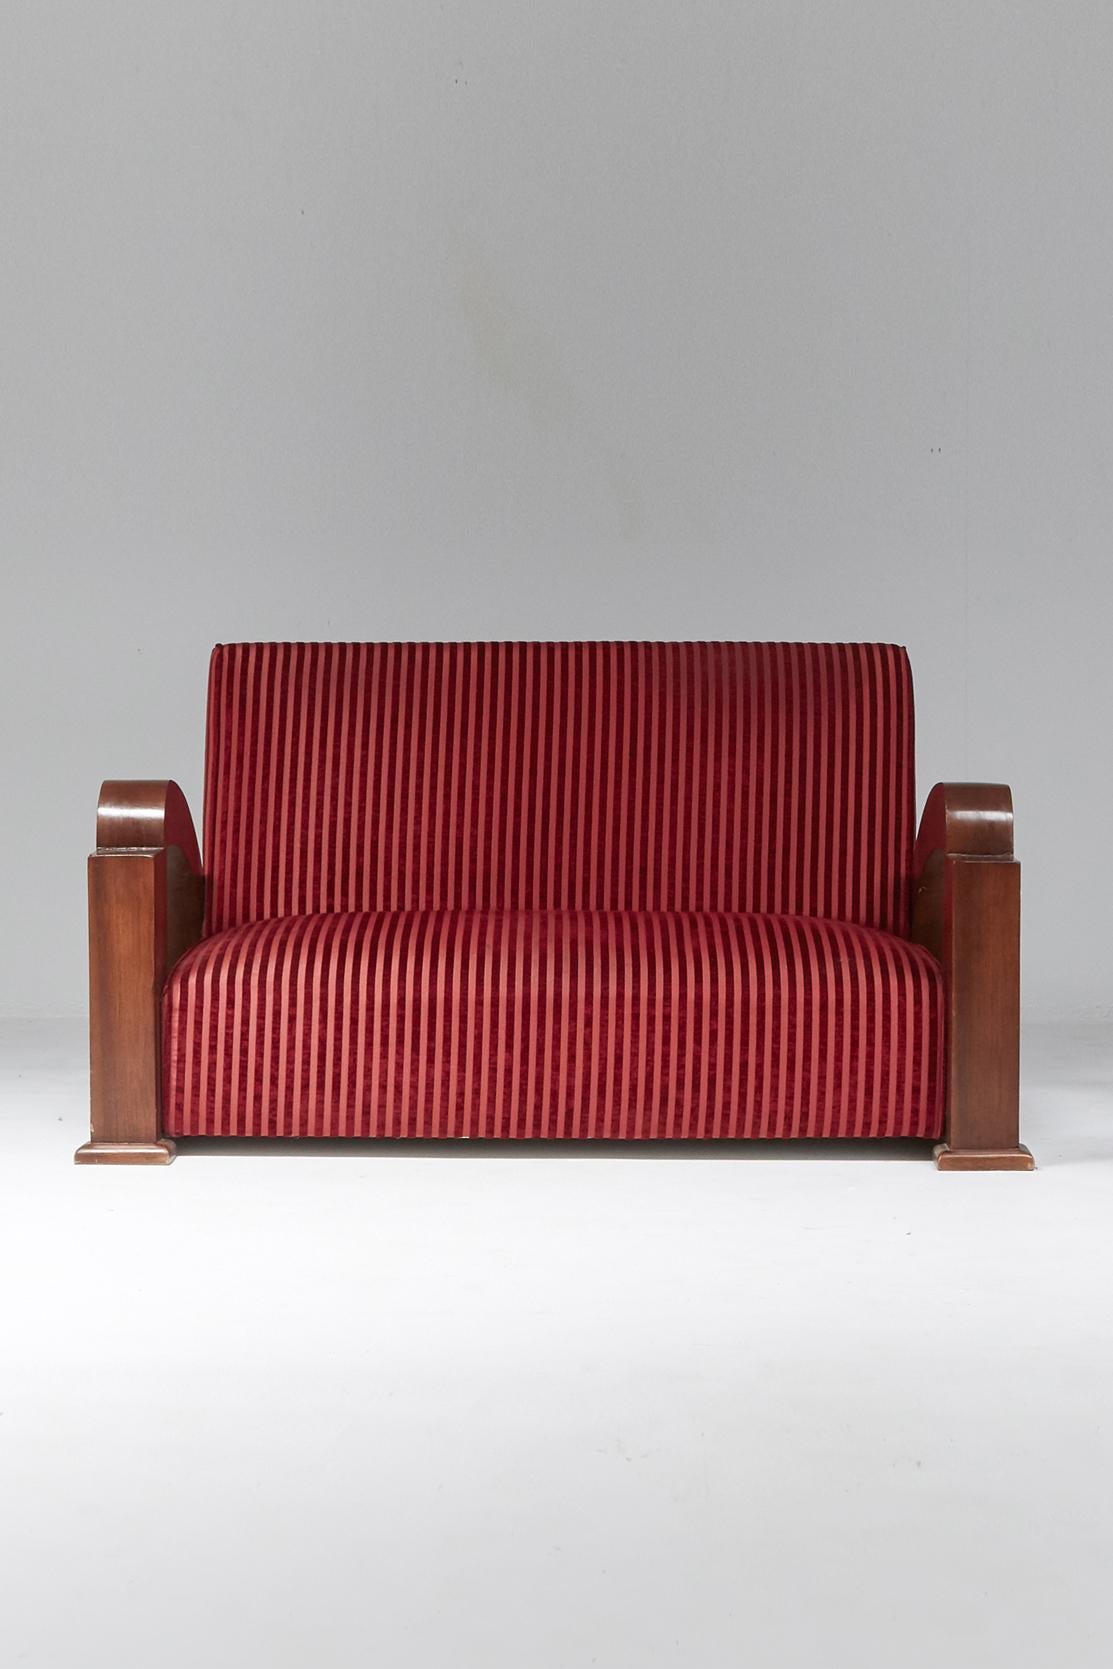 French Art Deco Sofa in Red Striped Velvet and with Swoosh Armrests 3